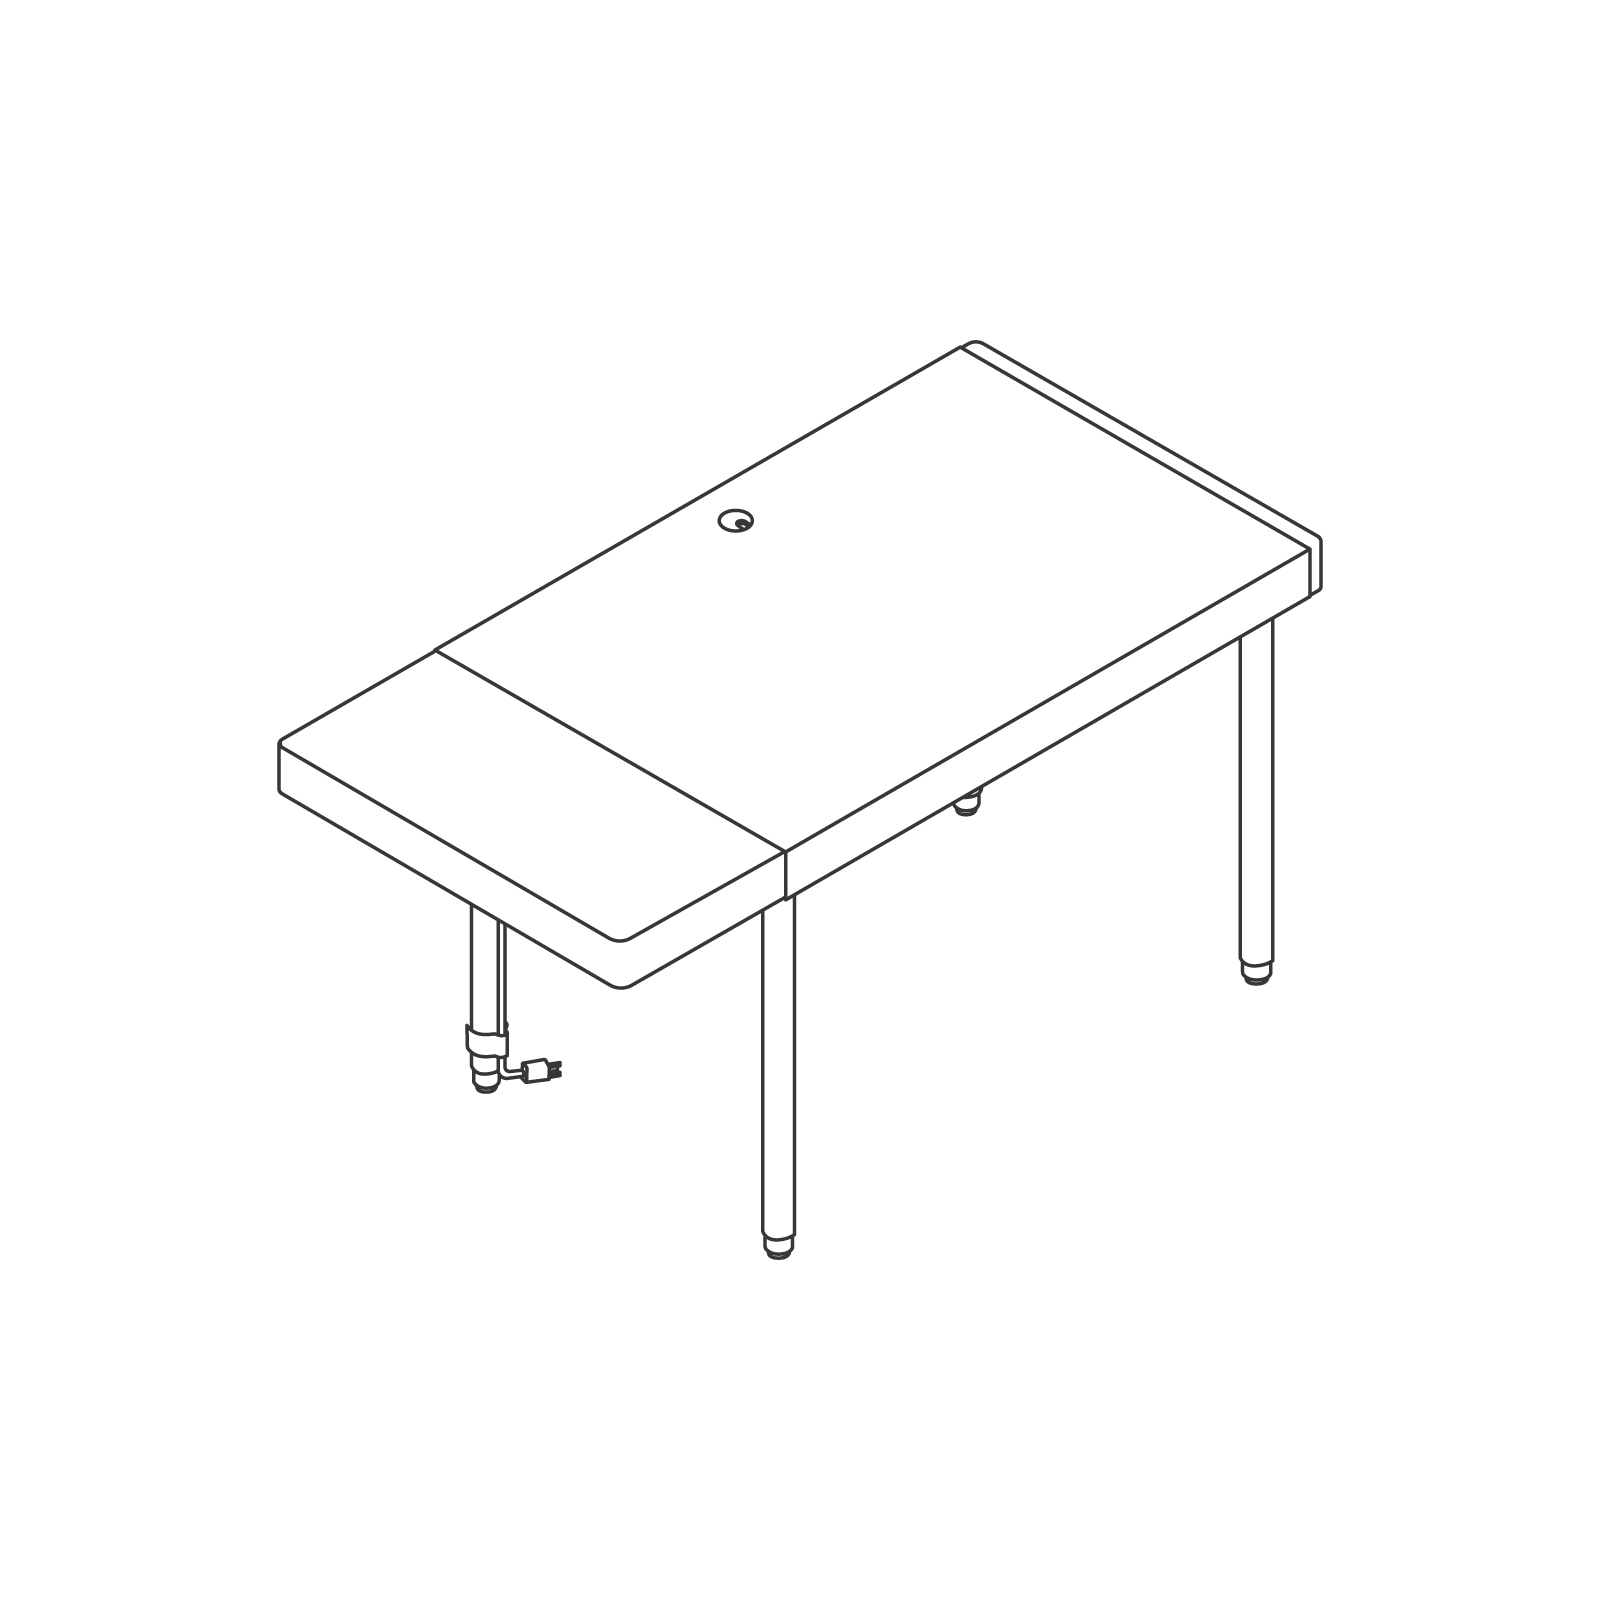 A line drawing - Leatherwrap Sit-to-Stand Desk–Drawer Left